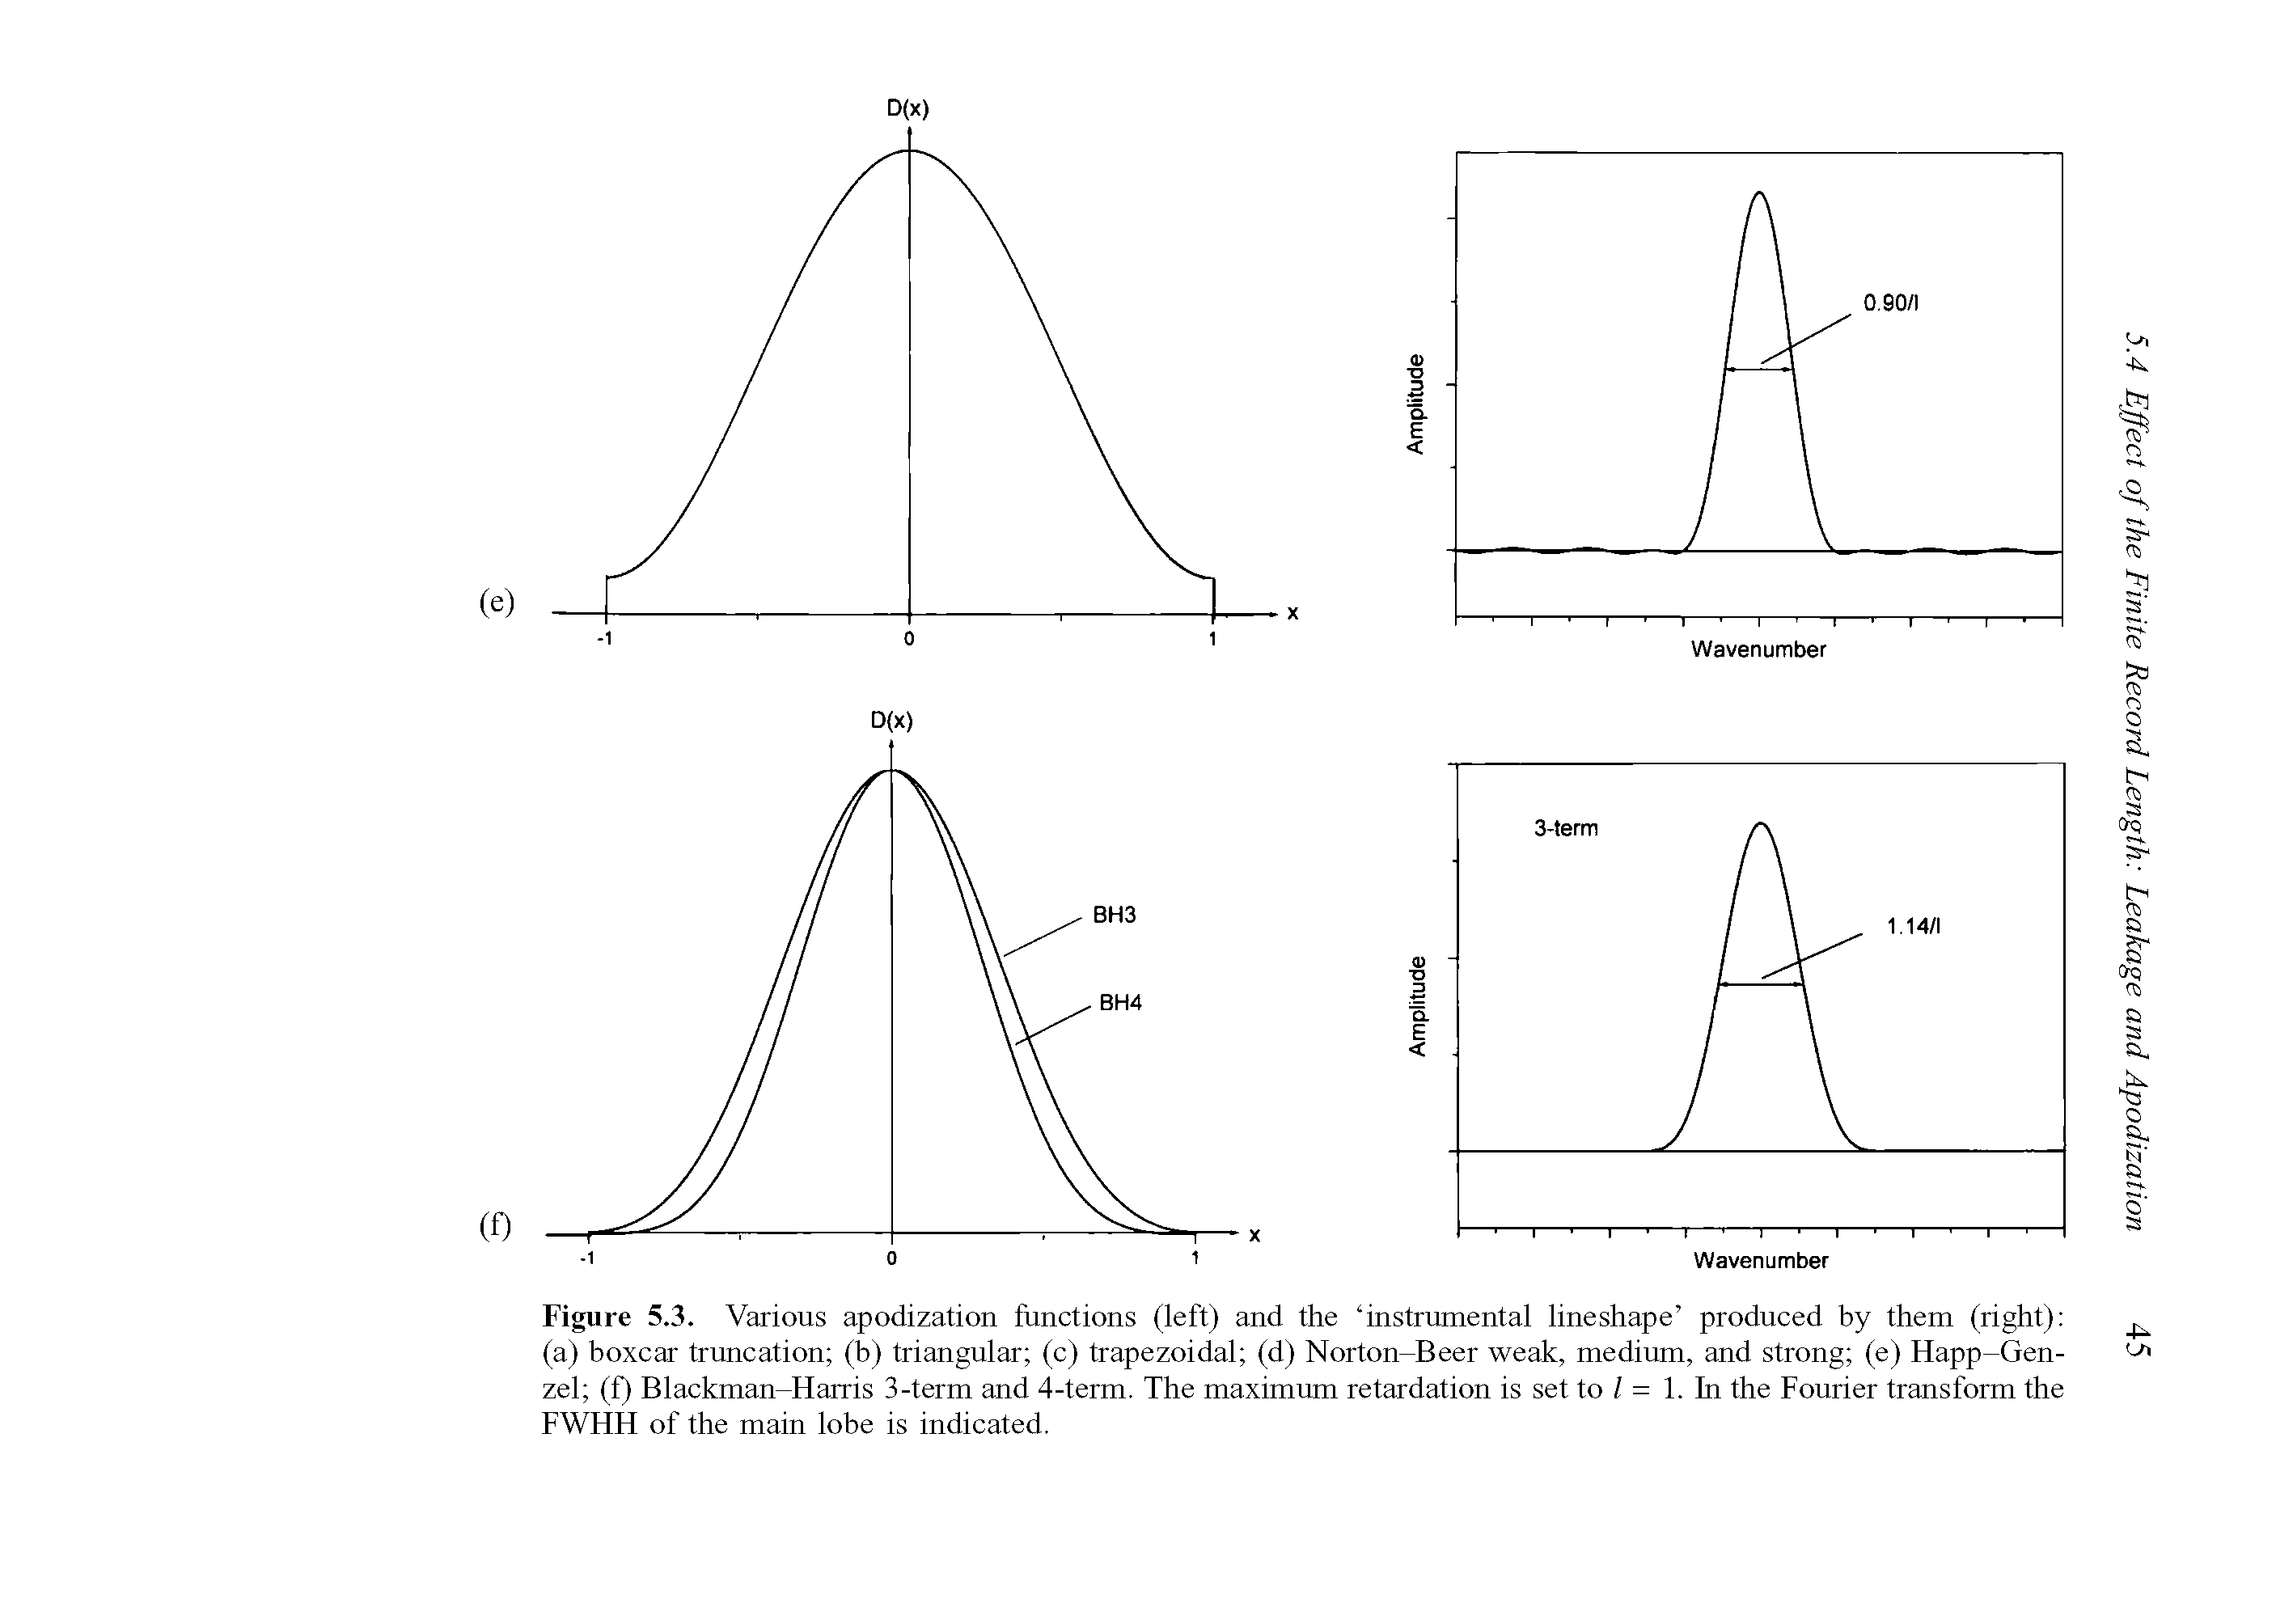 Figure 5.3. Various apodization functions (left) and the instrumental lineshape produced by them (right) (a) boxcar truncation (b) triangular (c) trapezoidal (d) Norton-Beer weak, medium, and strong (e) Happ-Gen-zel (f) Blackman-Harris 3-term and 4-term. The maximum retardation is set to / = 1. In the Fourier transform the FWHH of the main lobe is indicated.